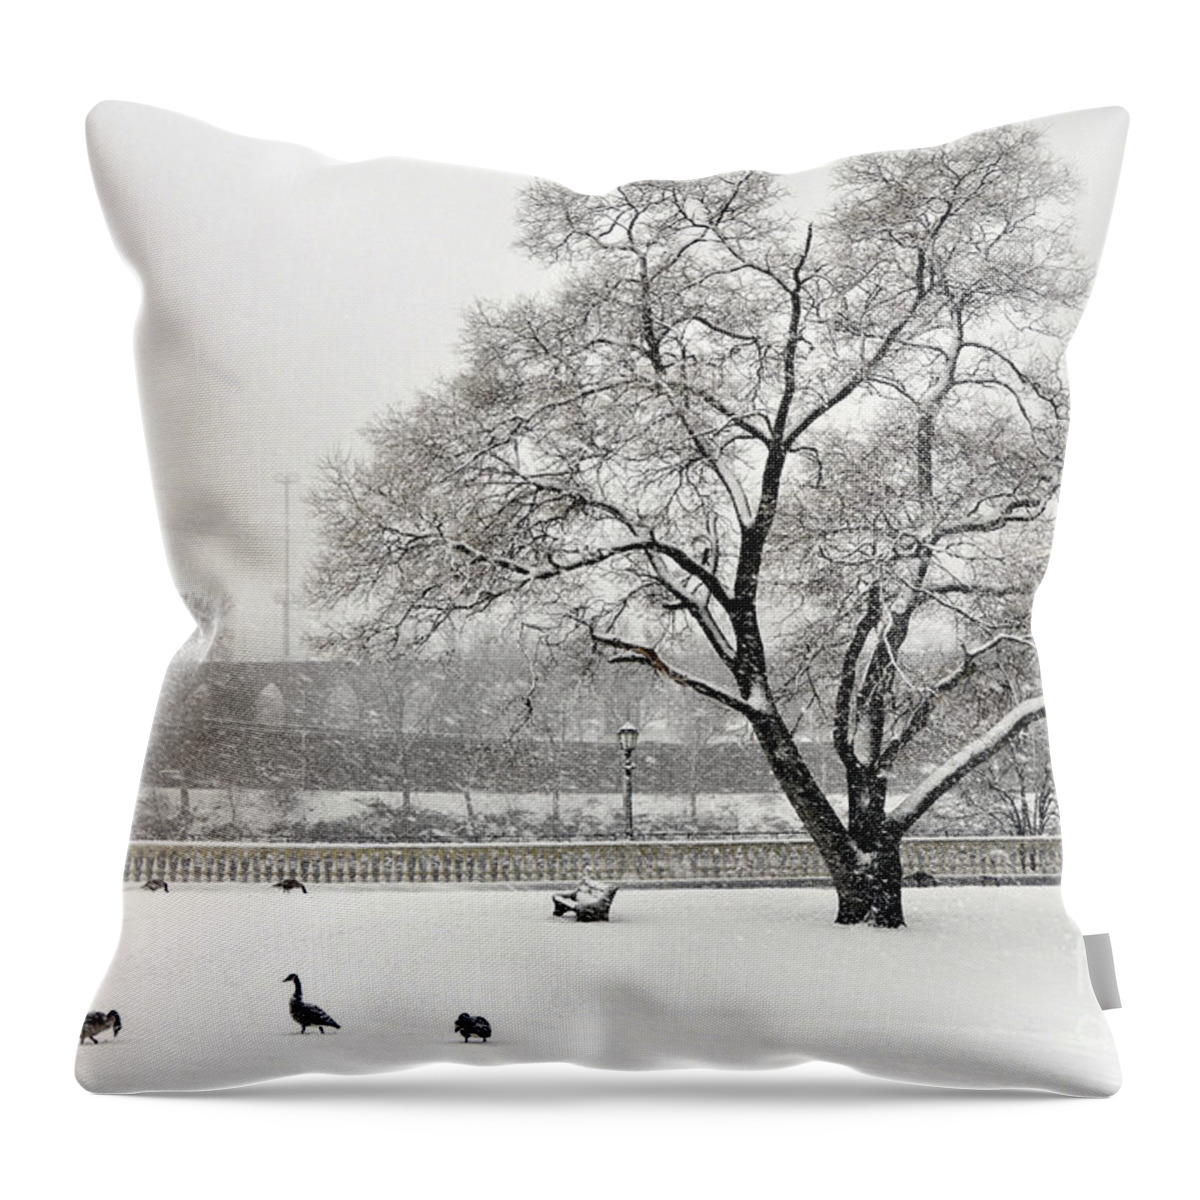 Canada Geese Throw Pillow featuring the photograph Canada Geese by Andrew Dinh